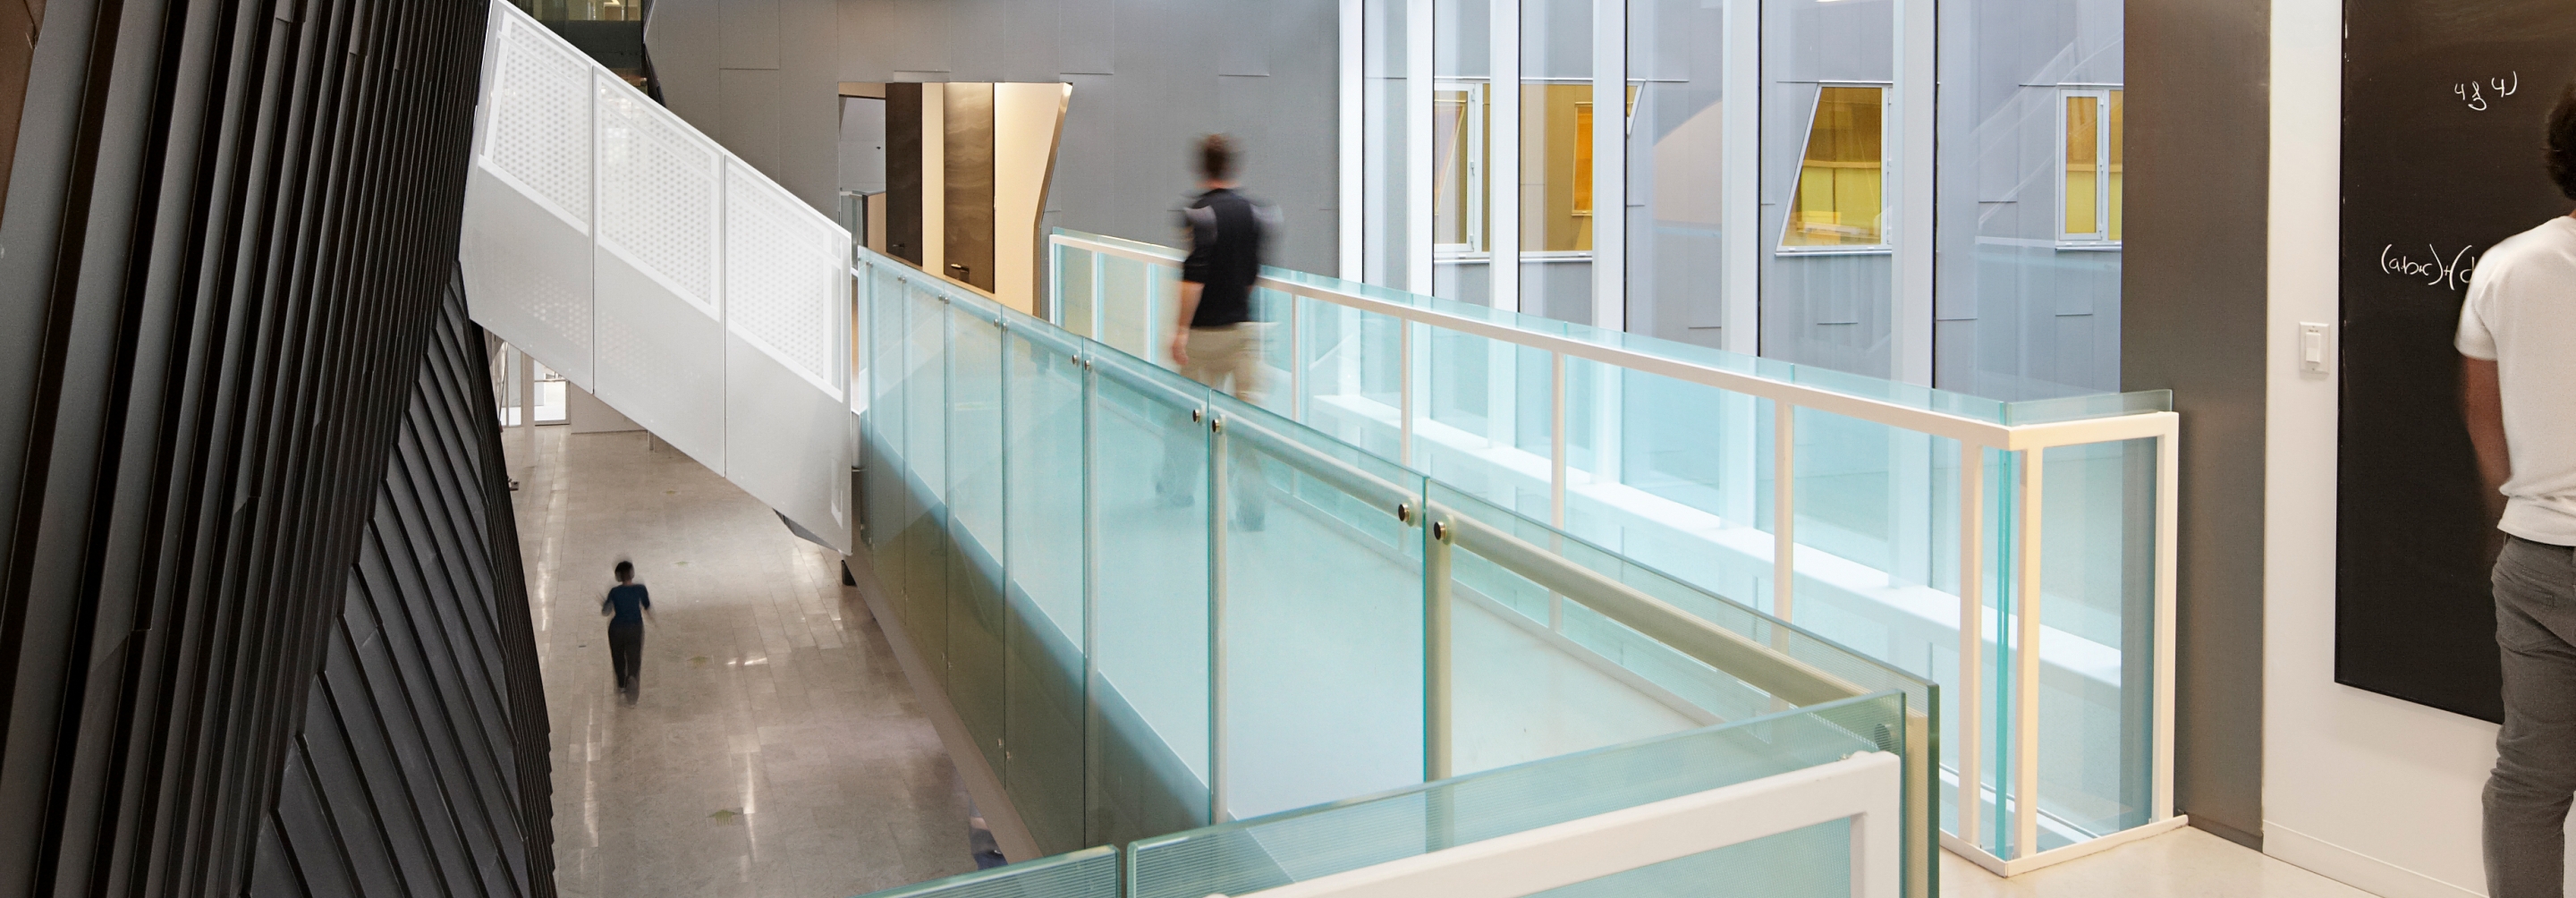 Person walking down an open hallway surrounded by glass windows